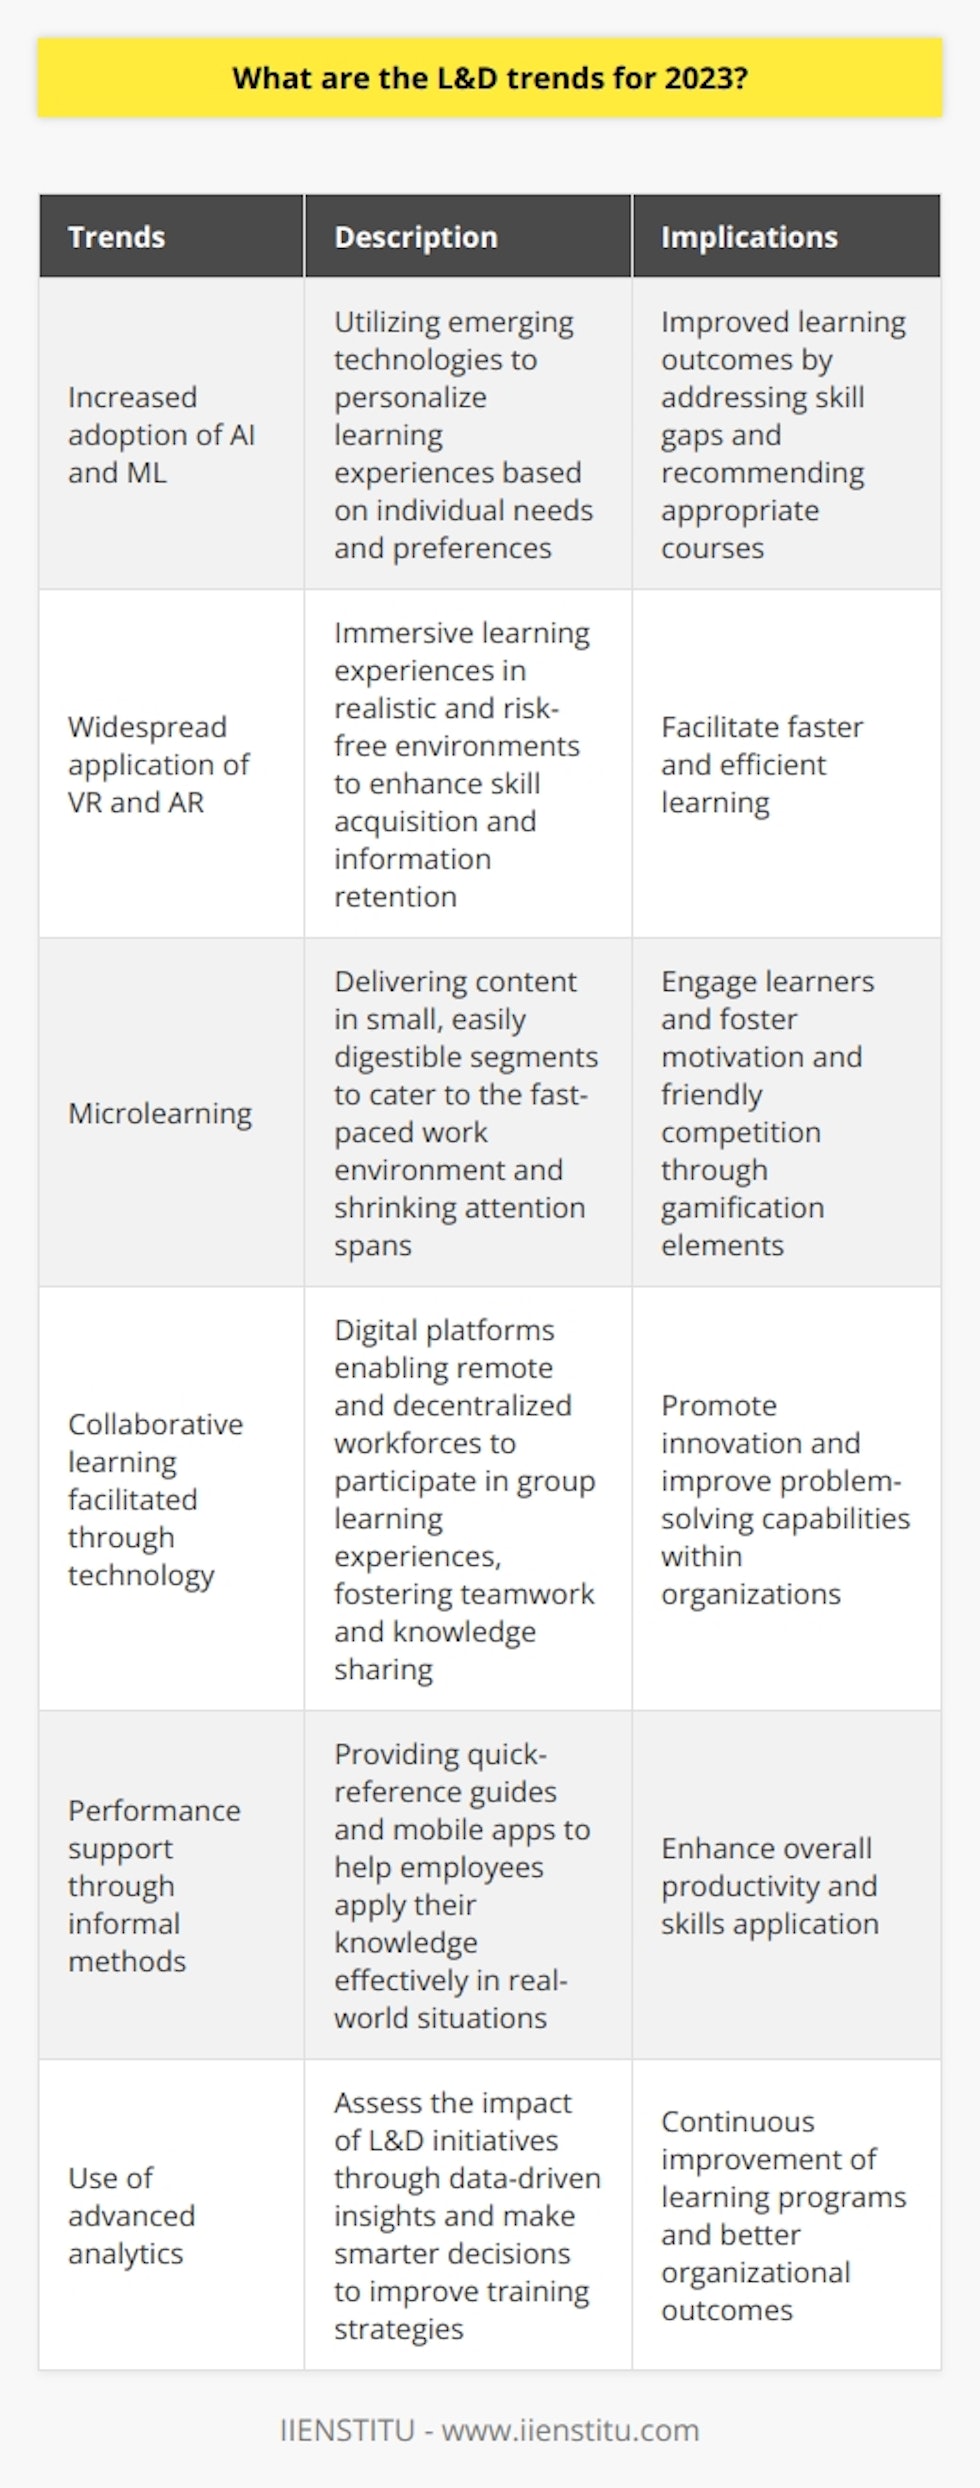 In the realm of learning and development (L&D), the year 2023 holds significant promise for innovative trends. One of the most notable trends is the increased adoption of emerging technologies, such as artificial intelligence (AI) and machine learning (ML). These technologies will enable personalized learning experiences tailored to the specific needs and preferences of individual learners. By utilizing smart systems, organizations can identify skill gaps and recommend appropriate courses, leading to improved learning outcomes.Furthermore, the year 2023 will witness the widespread application of virtual reality (VR) and augmented reality (AR) technologies in L&D. These immersive learning experiences will allow learners to practice skills in realistic and risk-free environments, enhancing the retention of vital information and expediting the acquisition of new skills.Another trend that will take center stage in 2023 is microlearning, which involves delivering content in small, easily digestible segments. This approach caters to the fast-paced nature of today's work environment and addresses shrinking attention spans. Additionally, incorporating gamification elements, such as badges and leaderboards, will further engage learners and foster motivation and friendly competition.The rise of remote and decentralized workforces will also drive the trend towards collaborative learning opportunities facilitated through technology. Digital platforms will enable employees from diverse geographical locations to participate in group learning experiences, fostering teamwork and knowledge sharing. This collaborative approach will ultimately lead to increased innovation and improved problem-solving capabilities within organizations.Moreover, effective learning strategies in 2023 will prioritize performance support for employees. Instead of solely relying on traditional courses, organizations will provide informal support through quick-reference guides and mobile apps. This shift aims to help employees apply their knowledge more effectively in real-world situations, ultimately enhancing overall productivity.Lastly, the use of advanced analytics will play a key role in assessing the impact of L&D initiatives. Through data-driven insights, organizations can make smarter decisions and continuously improve their training strategies.To conclude, the L&D trends for 2023 revolve around the integration of emerging technologies, the incorporation of immersive learning experiences, the utilization of analytics and performance support, and the promotion of collaborative learning. These trends will contribute to more engaging, effective, and impactful learning opportunities for employees, ultimately propelling organizational growth and success.